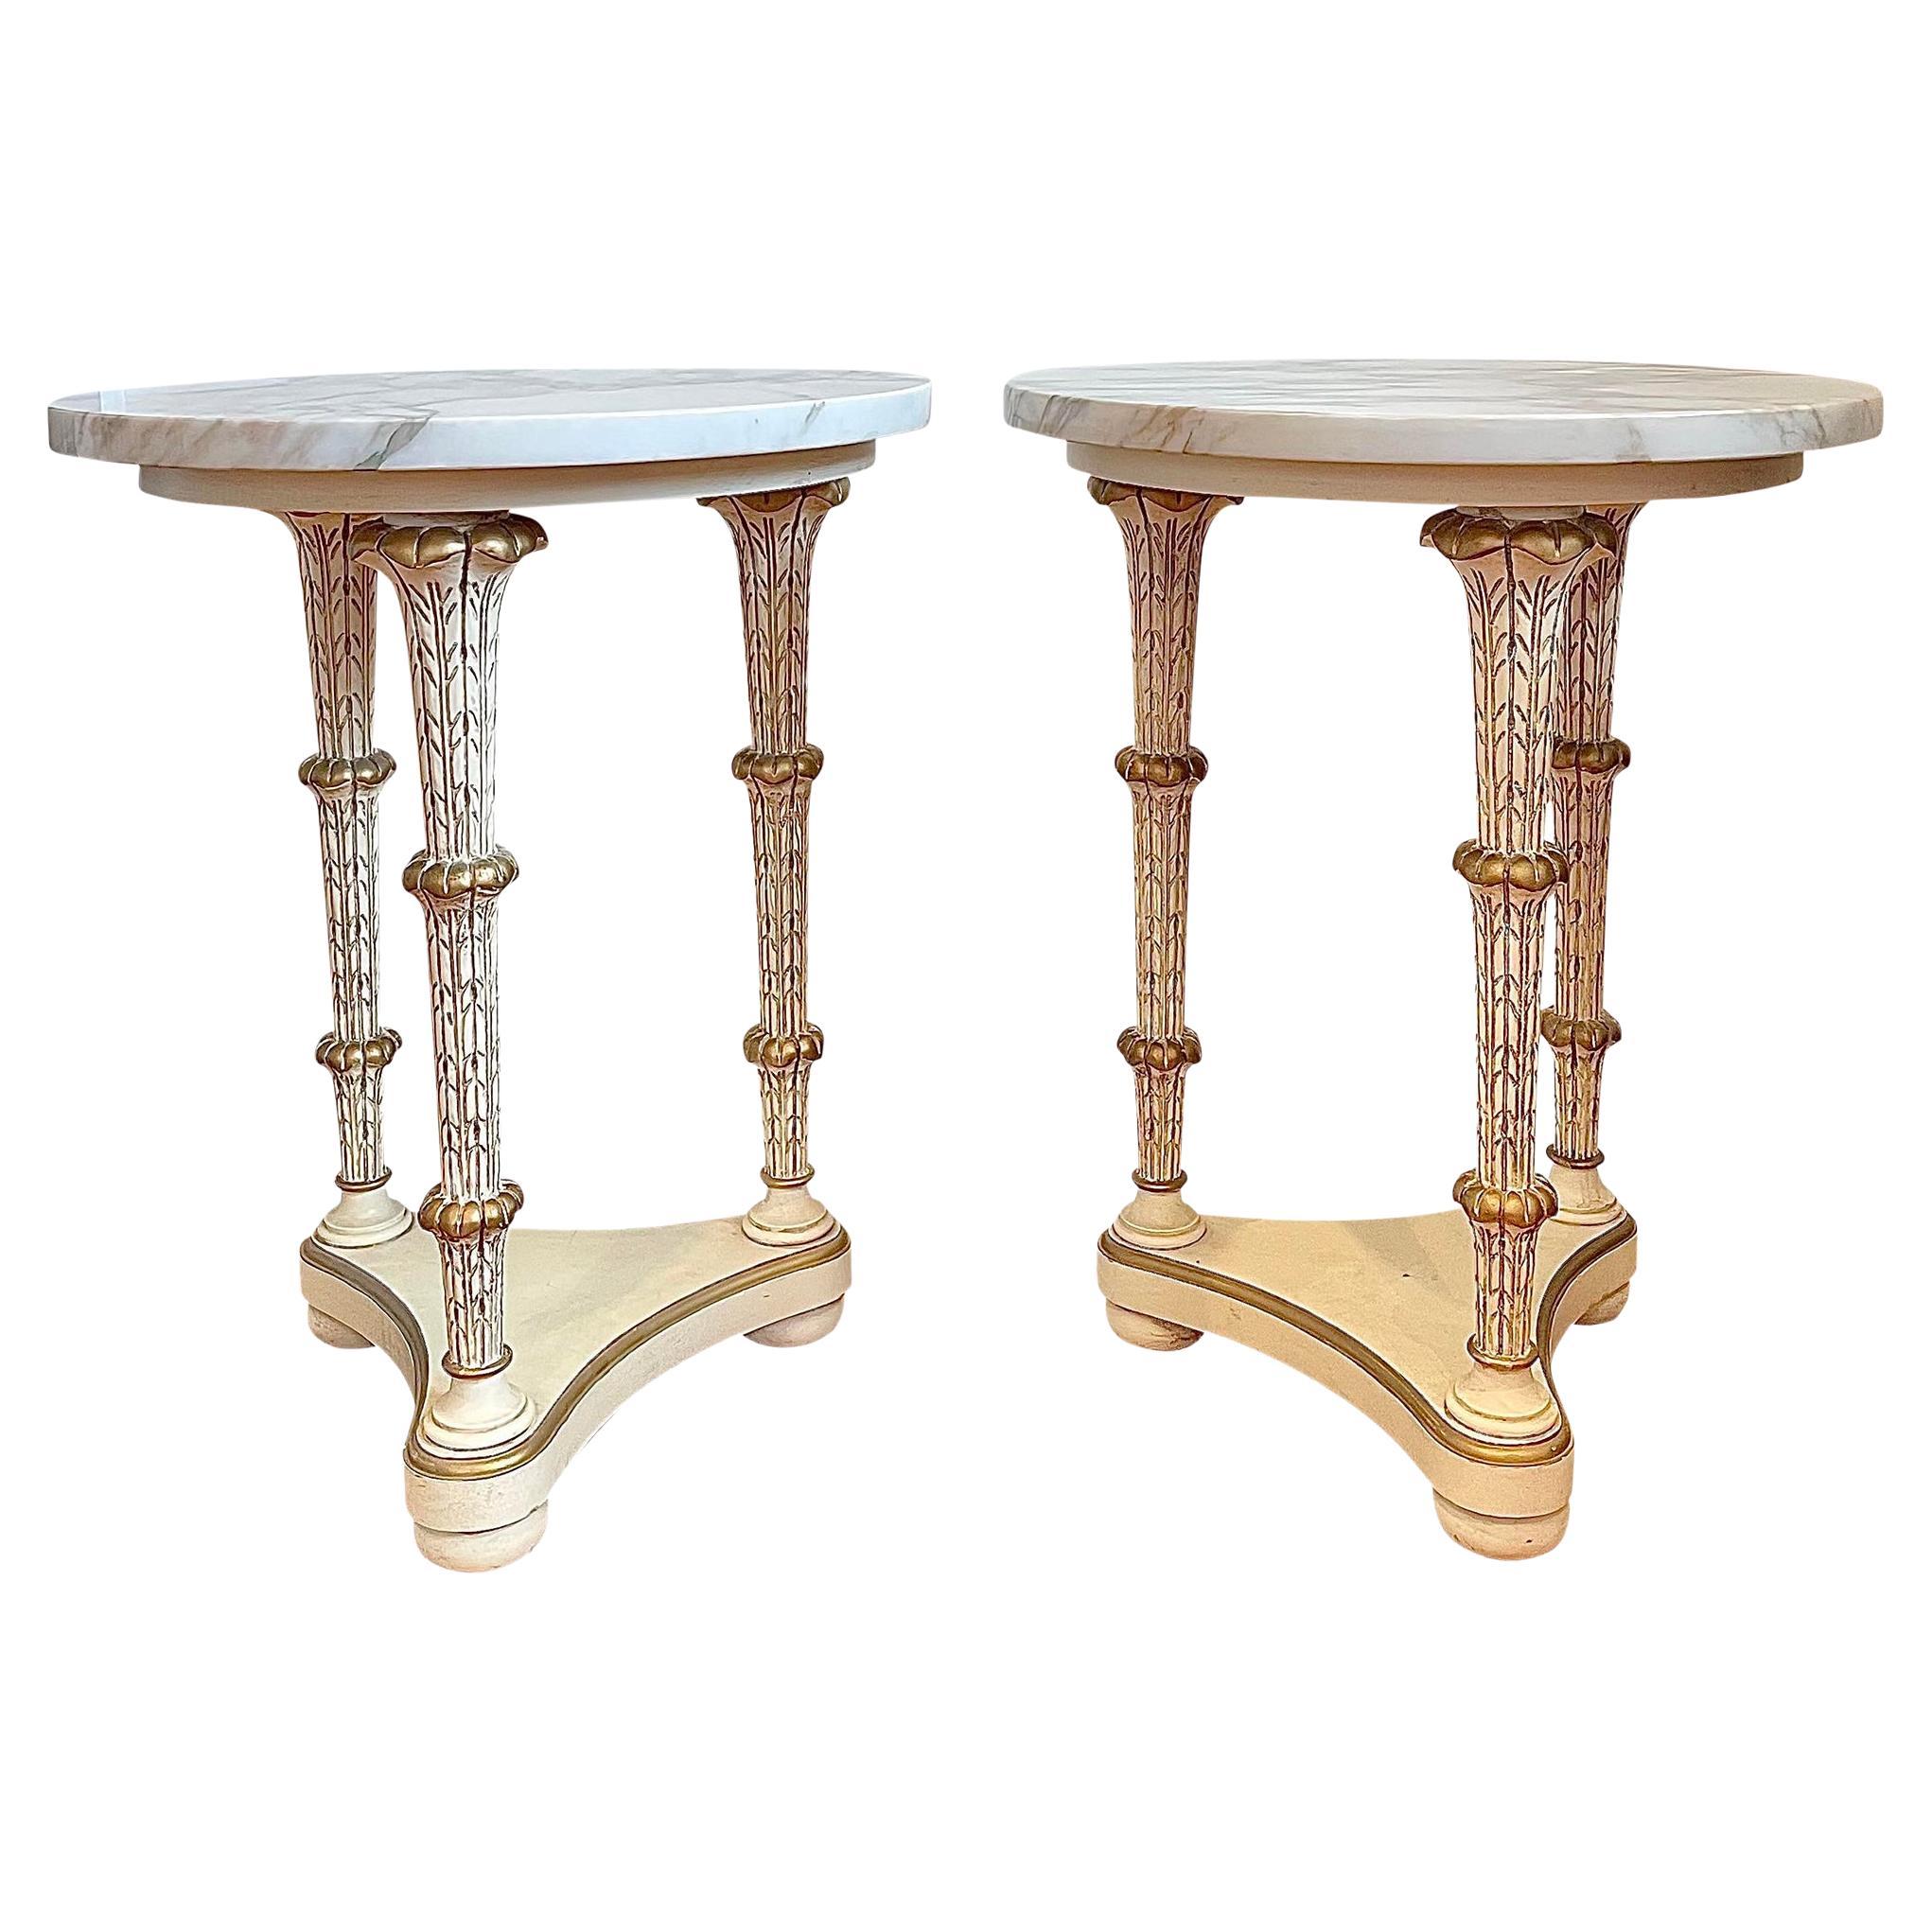 Mid 20th Century Neoclassical Style Marble Top Gueridon Tables - a Pair